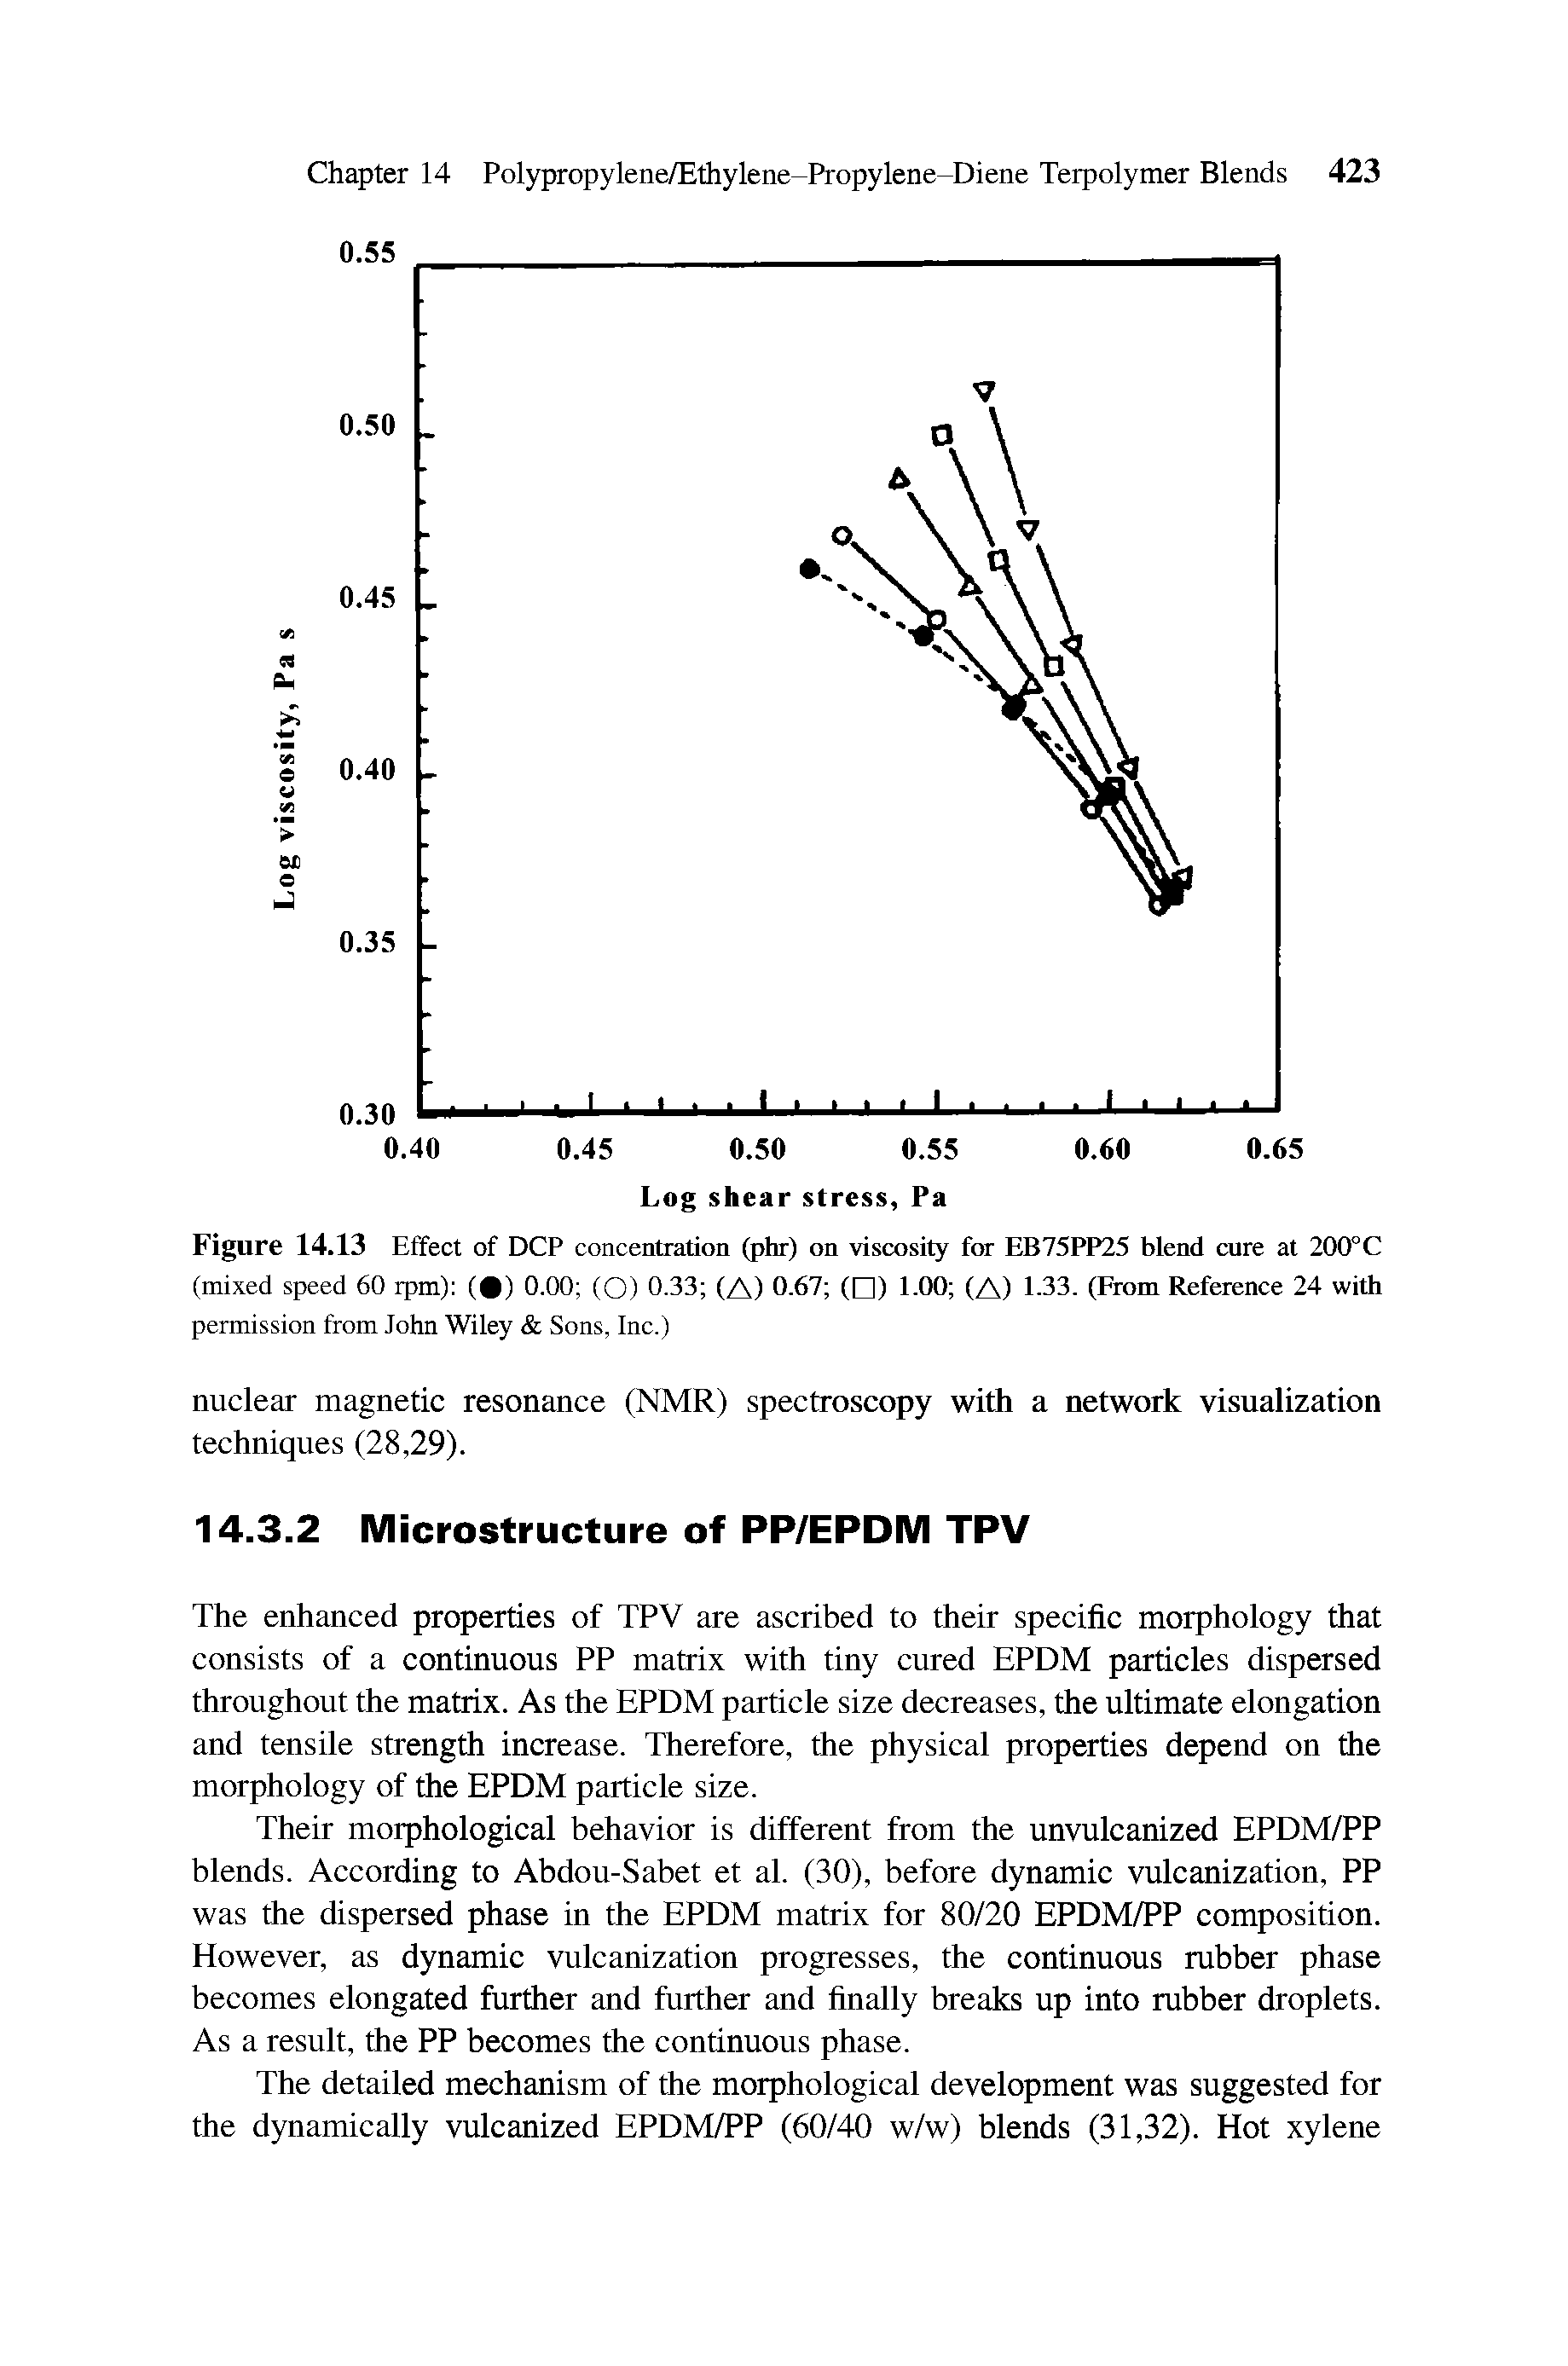 Figure 14.13 Effect of DCP concentration (phr) on viscosity for EB75PP25 blend cure at 200°C (mixed speed 60 rpm) ( ) 0.00 (O) 0.33 (A) 0.67 ( ) 1.00 (A) 1-33. (From Reference 24 with permission from John Wiley Sons, Inc.)...